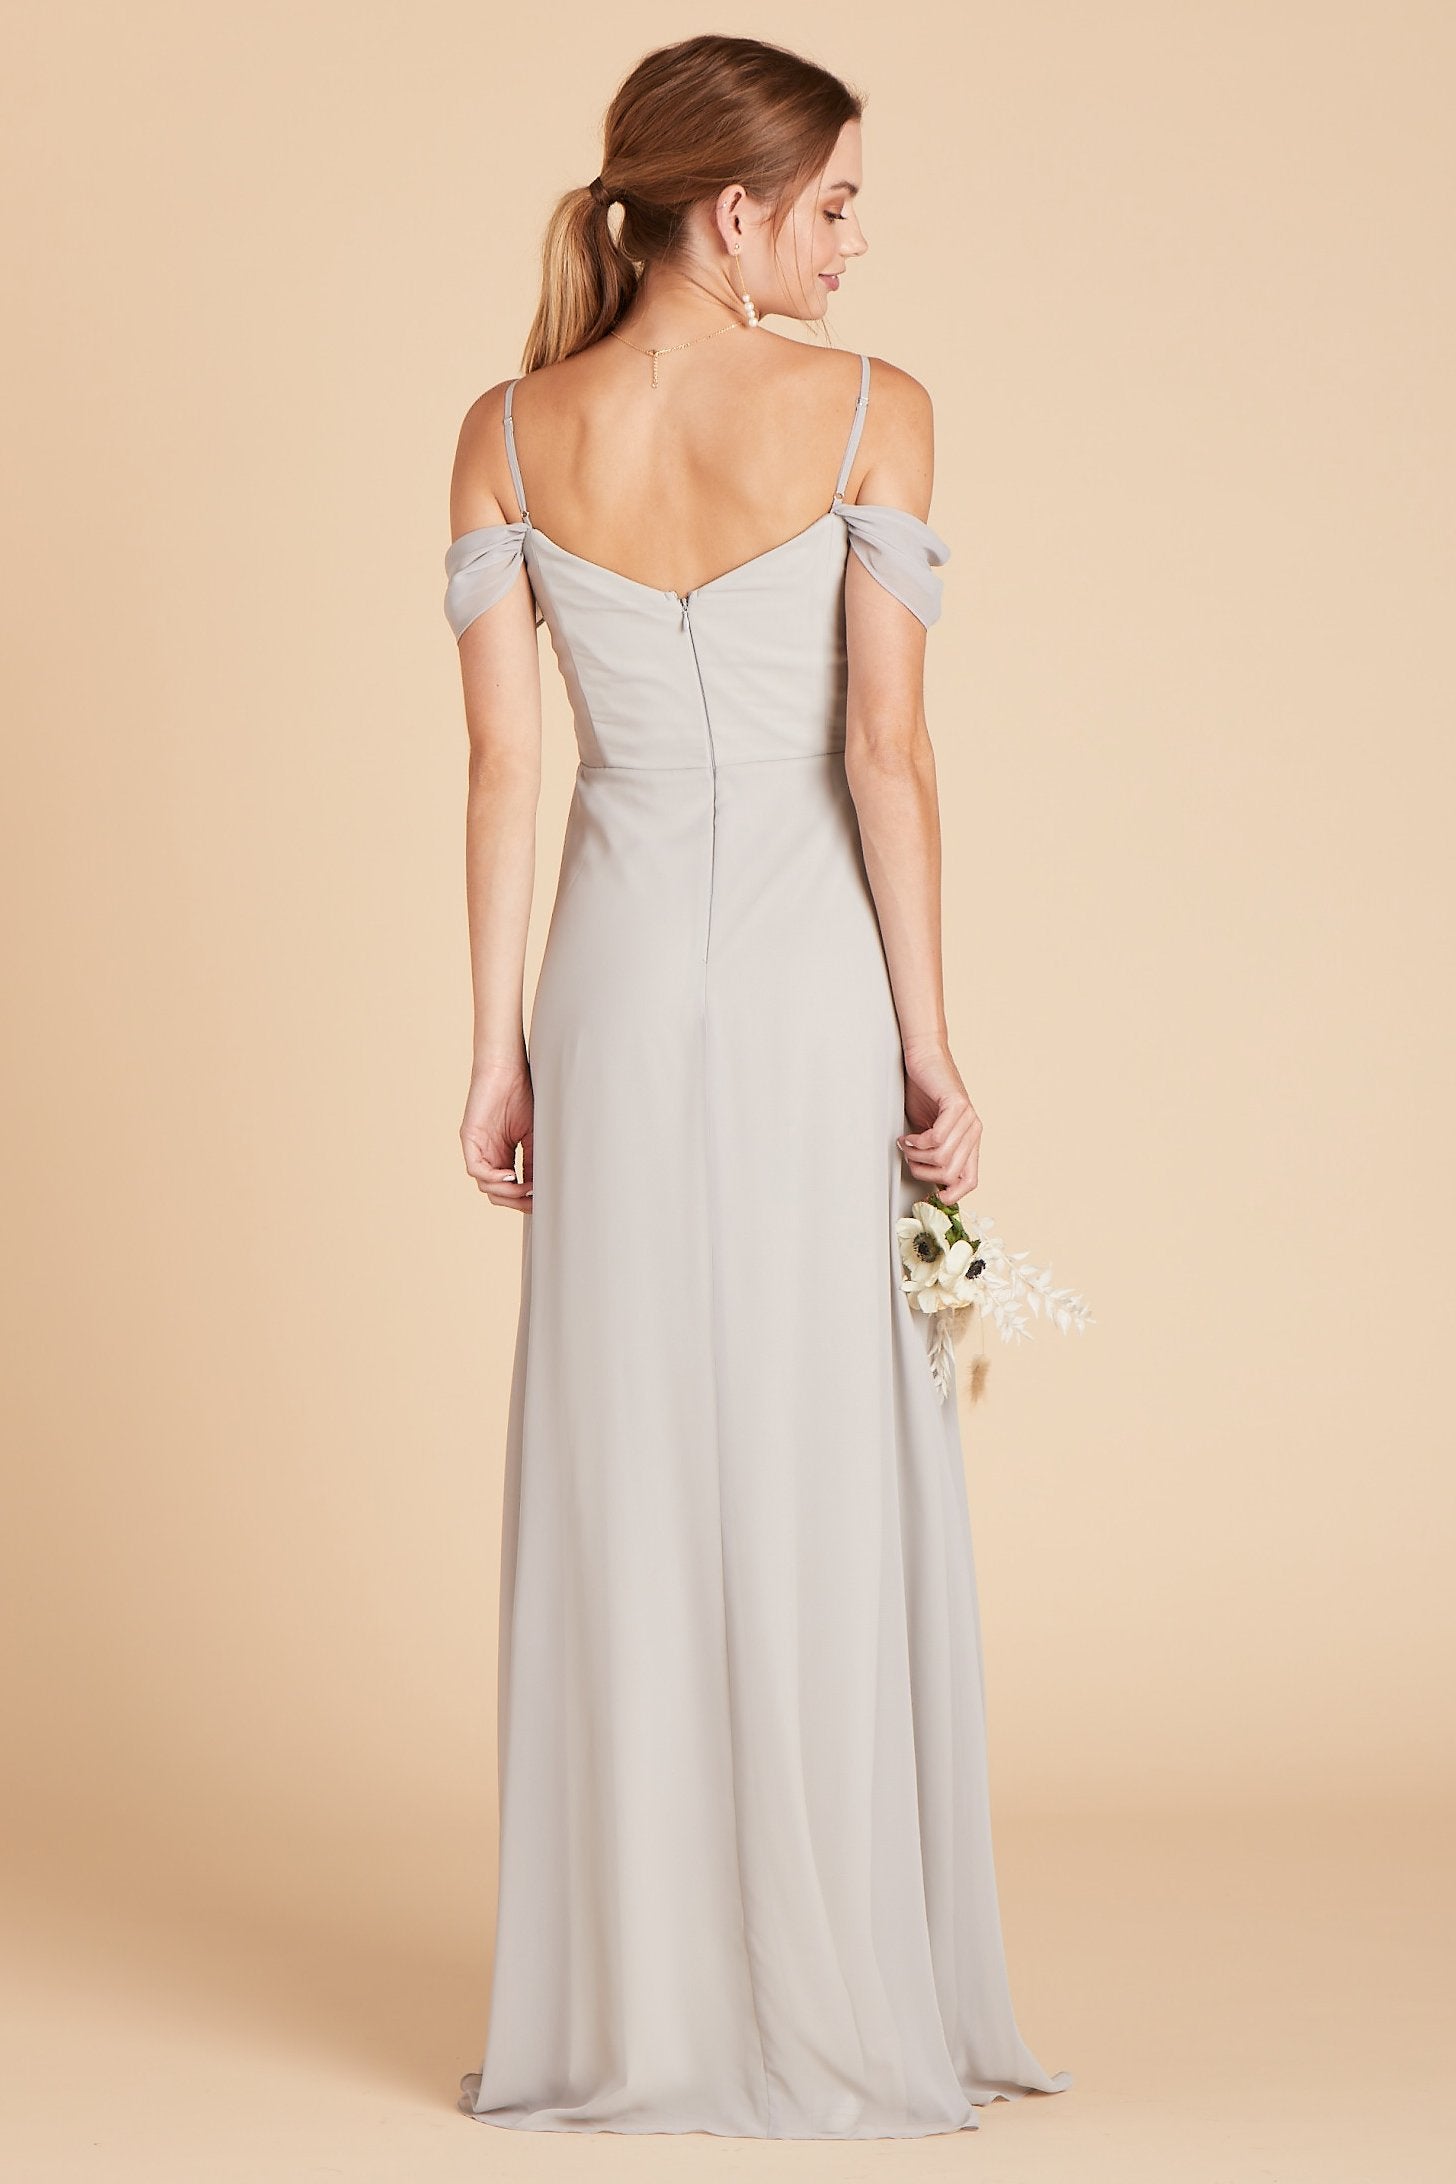 Dove Gray Spence Convertible Dress by Birdy Grey